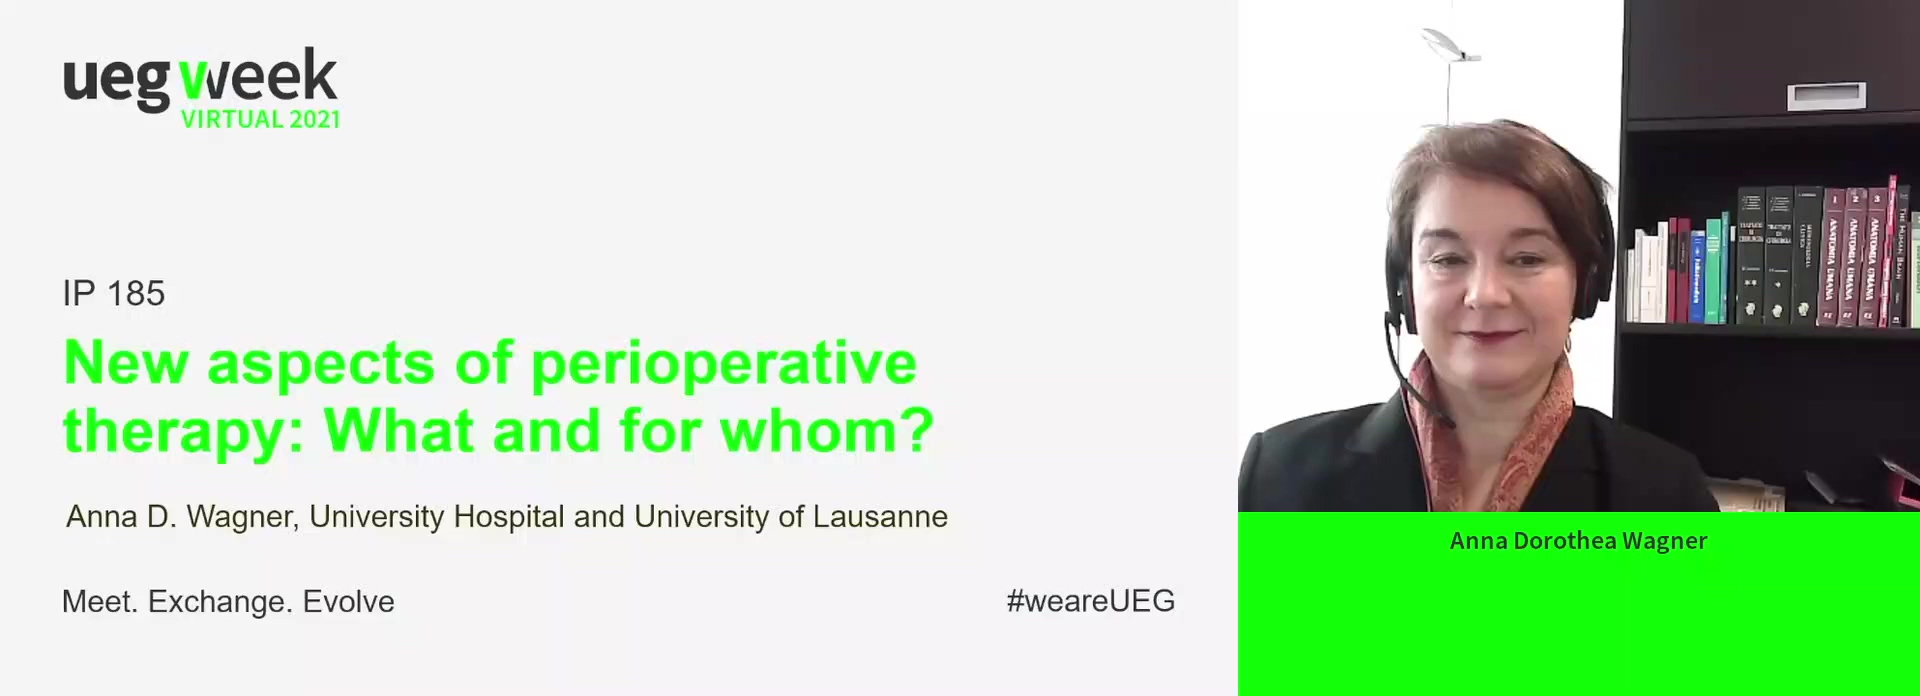 New aspects of perioperative therapy: What and for whom?